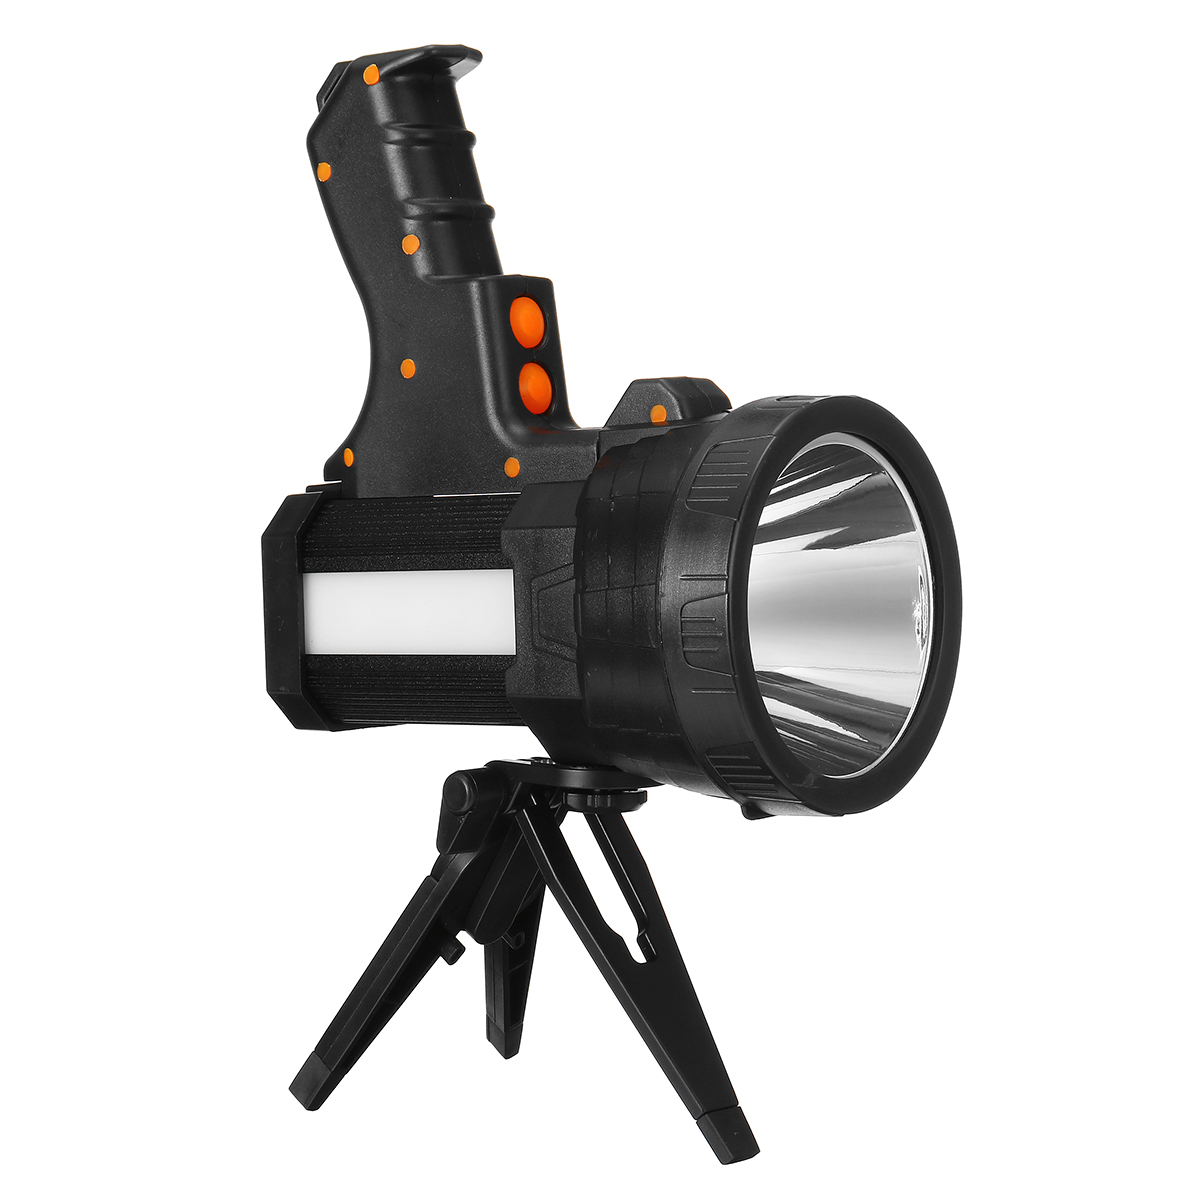 L2-6000LM-500m-Strong-LED-Spotlight-with-Tripod-9600mAh-USB-Rechargeable-Powerful-Searchlight-Portab-1756922